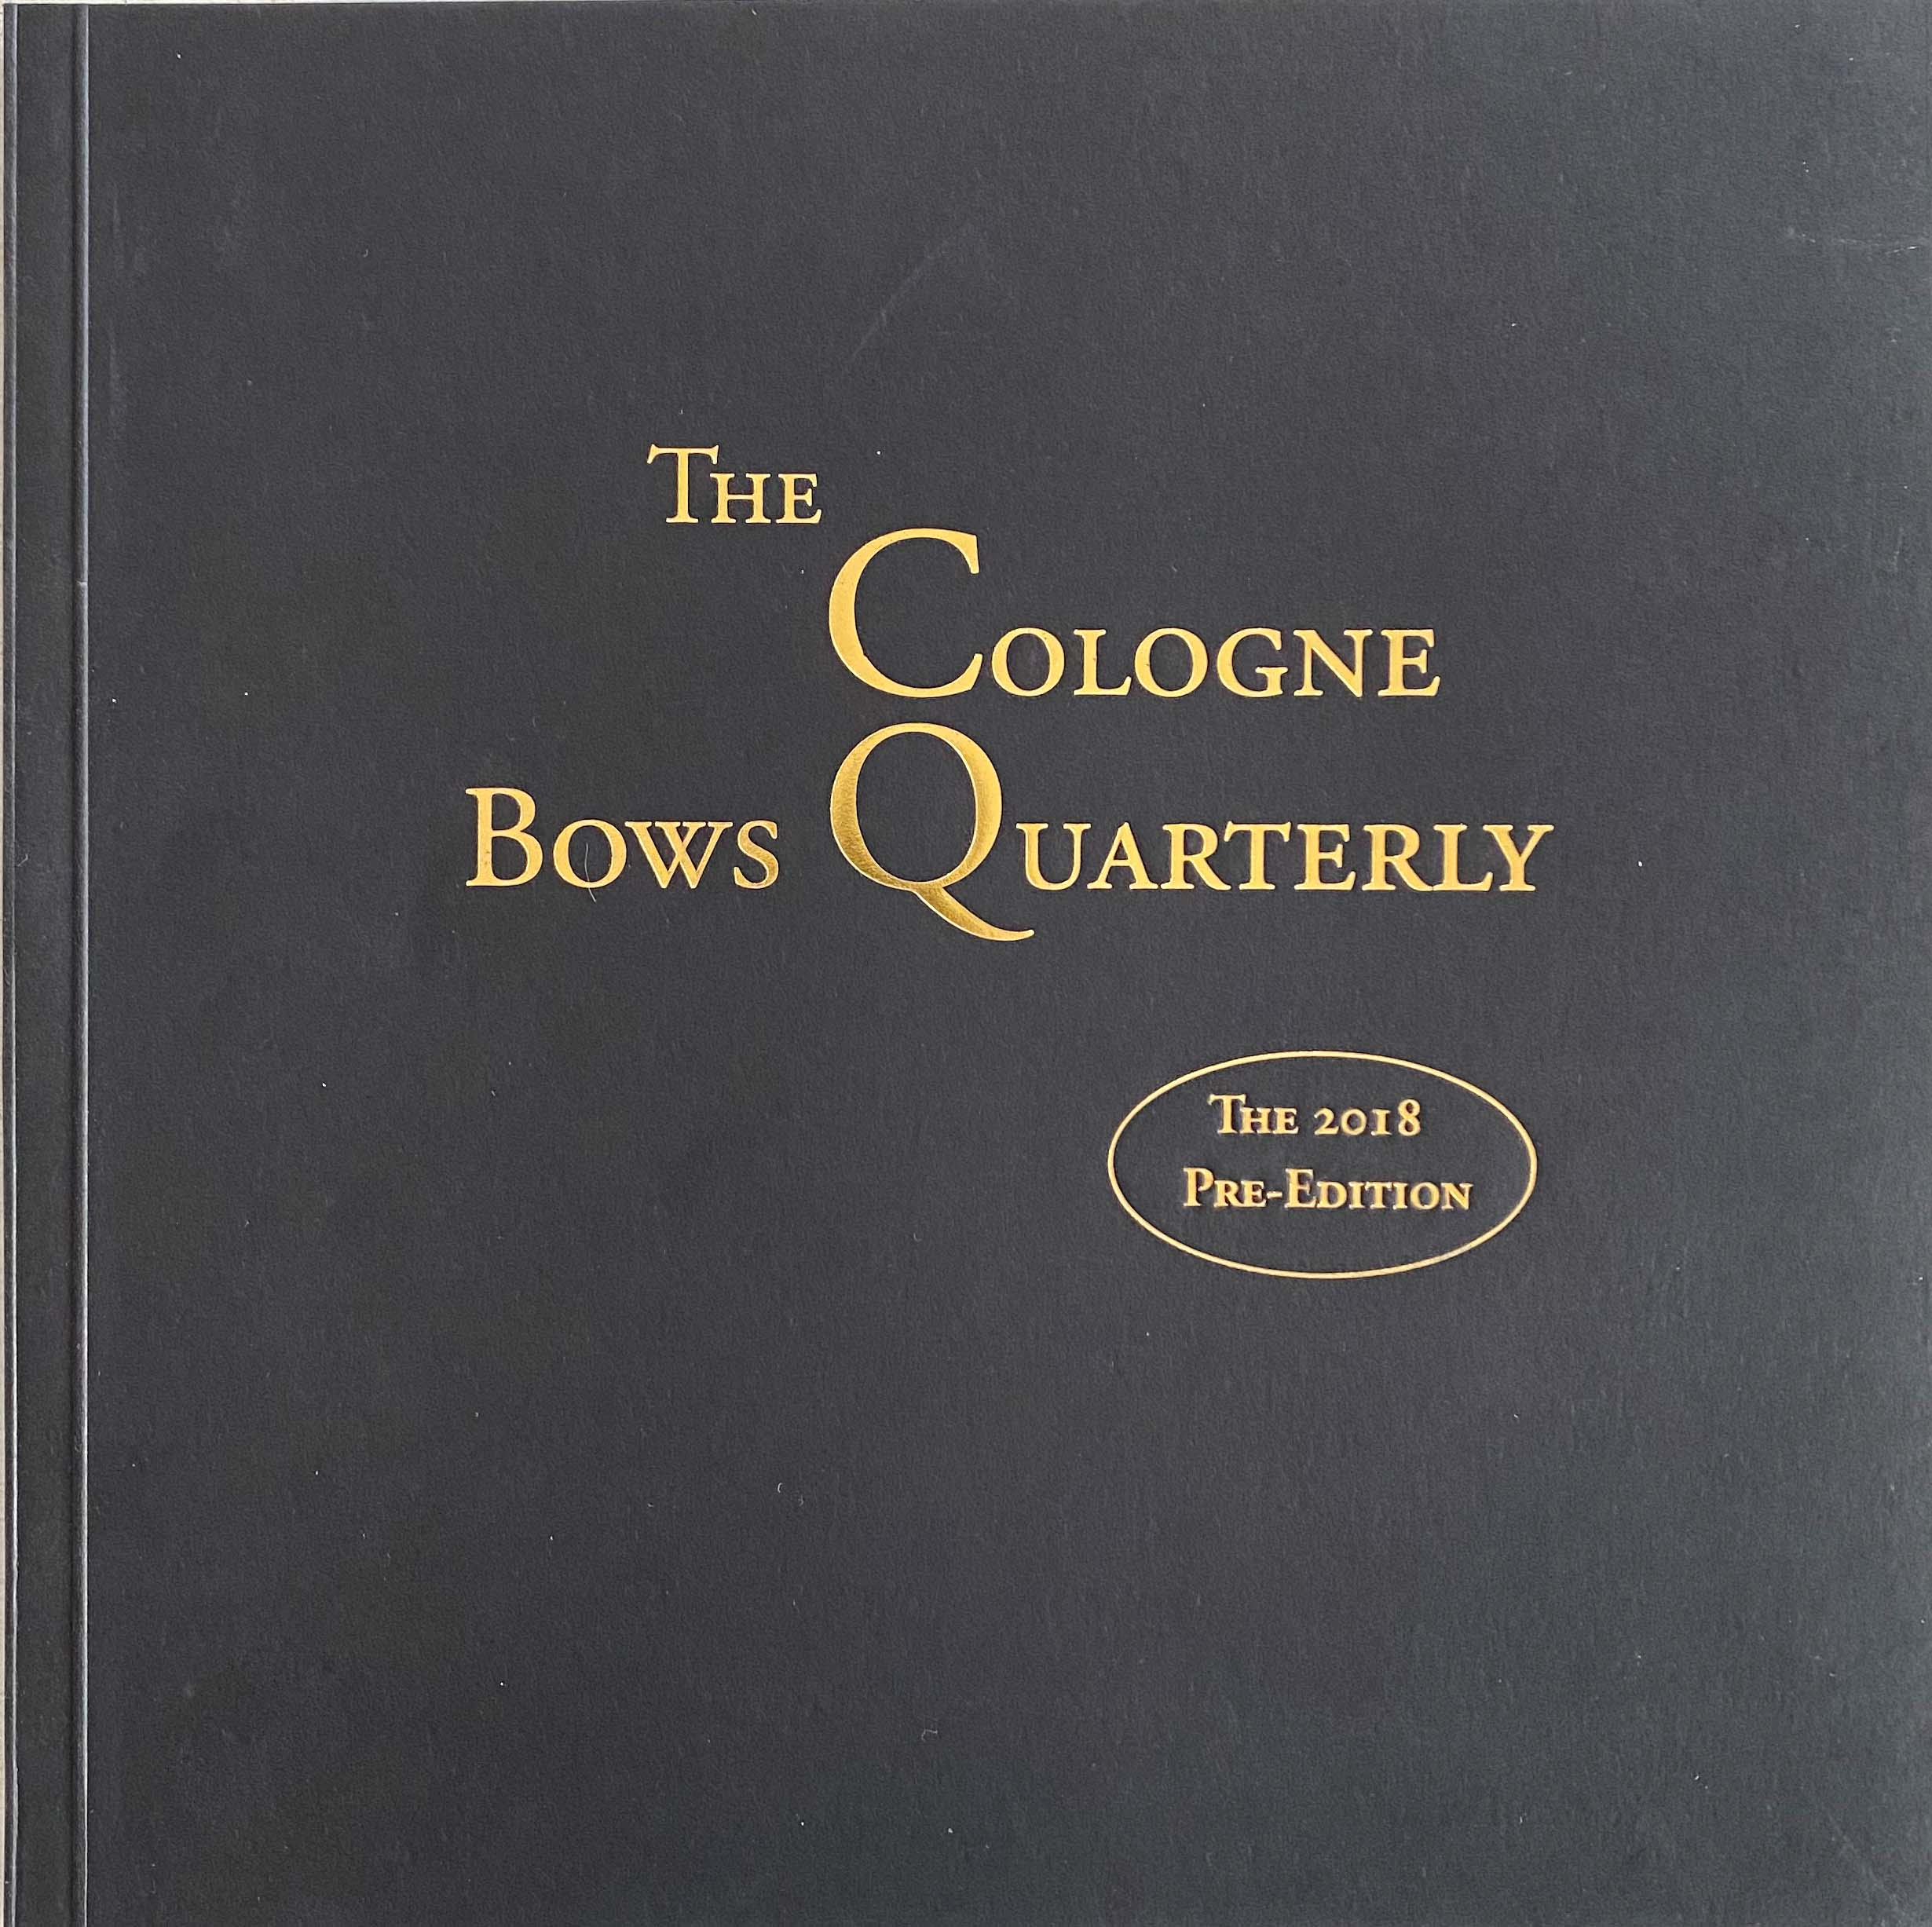 The Cologne Bows Quarterly - Edition 2018